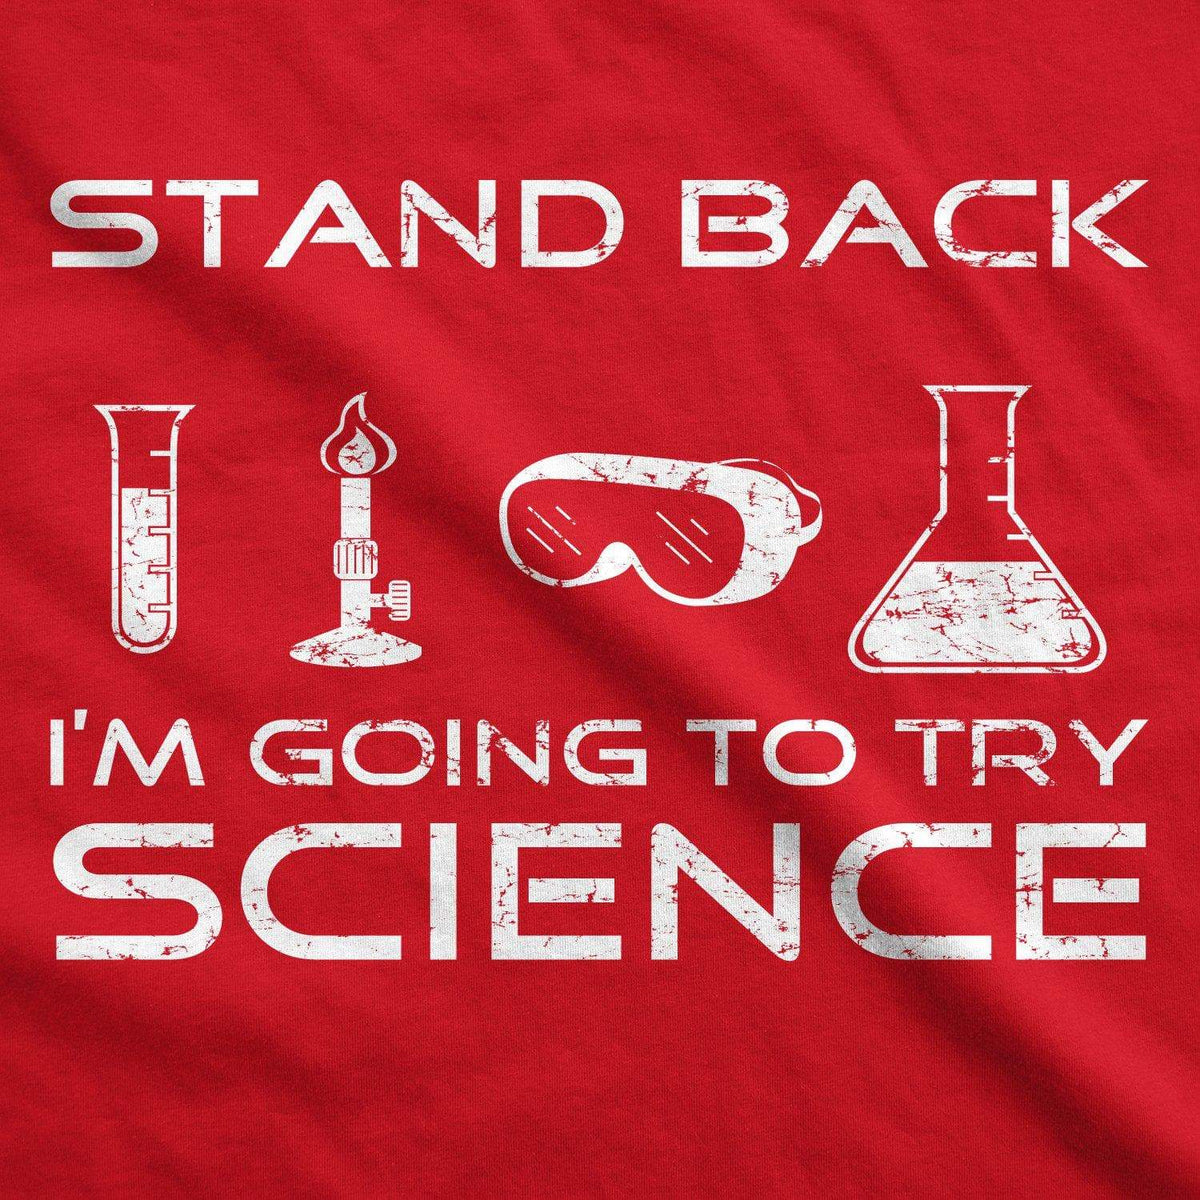 Stand Back I&#39;m Going To Try Science Youth Tshirt  -  Crazy Dog T-Shirts